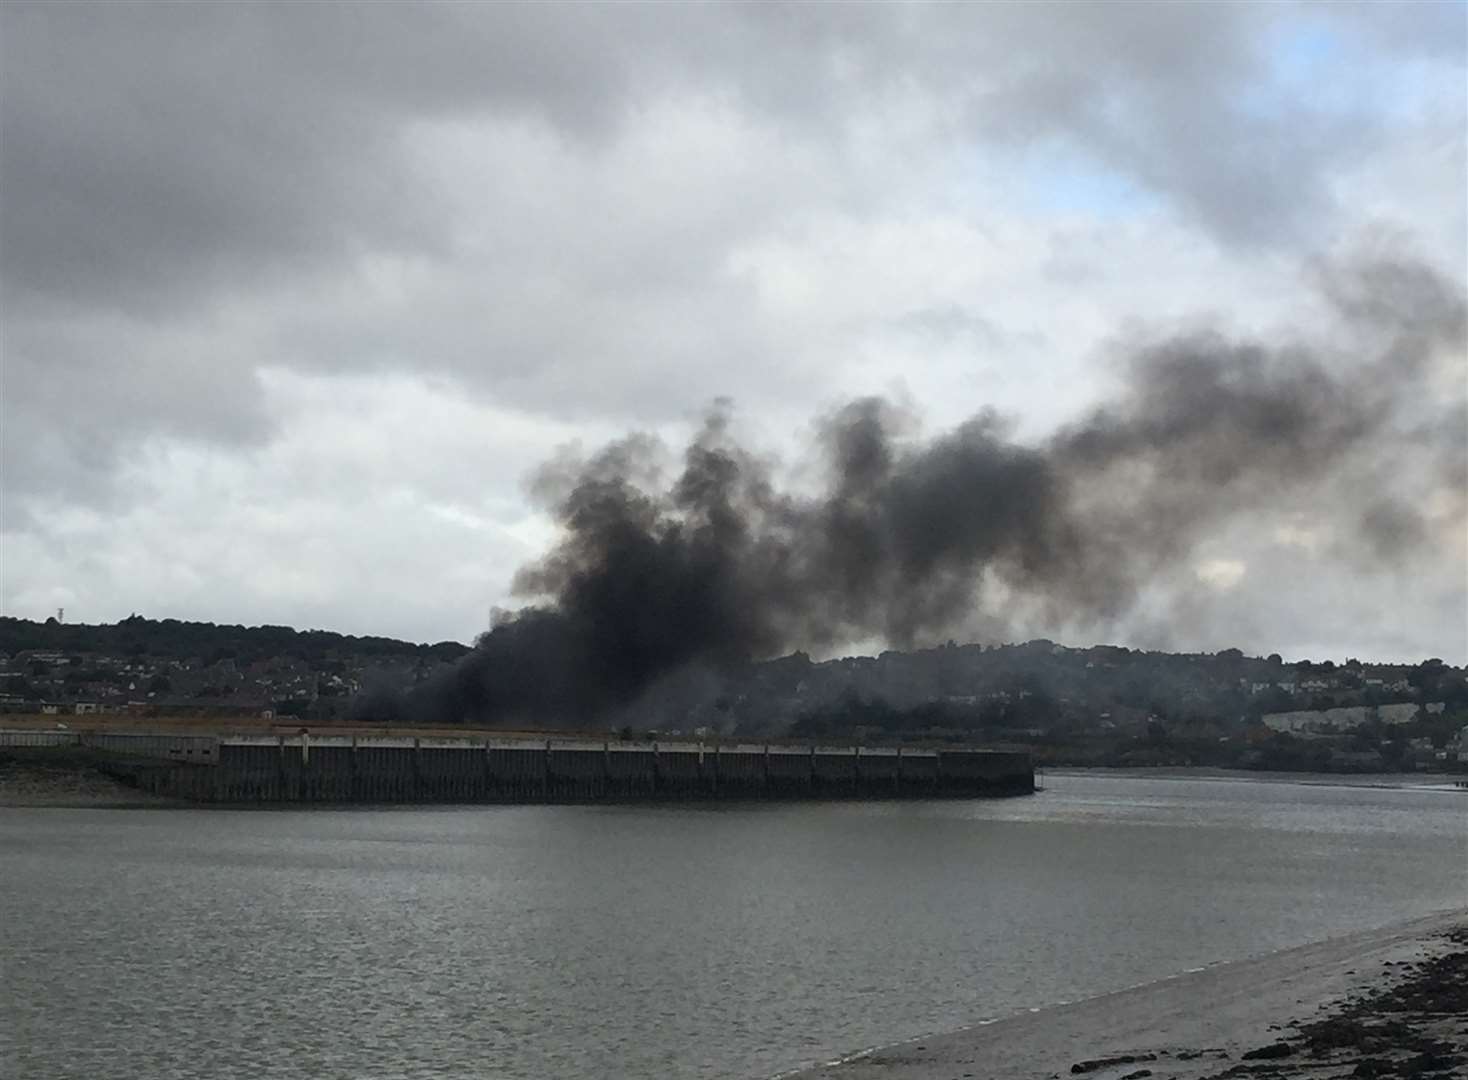 LATEST: Police confirm arson at ship yard 